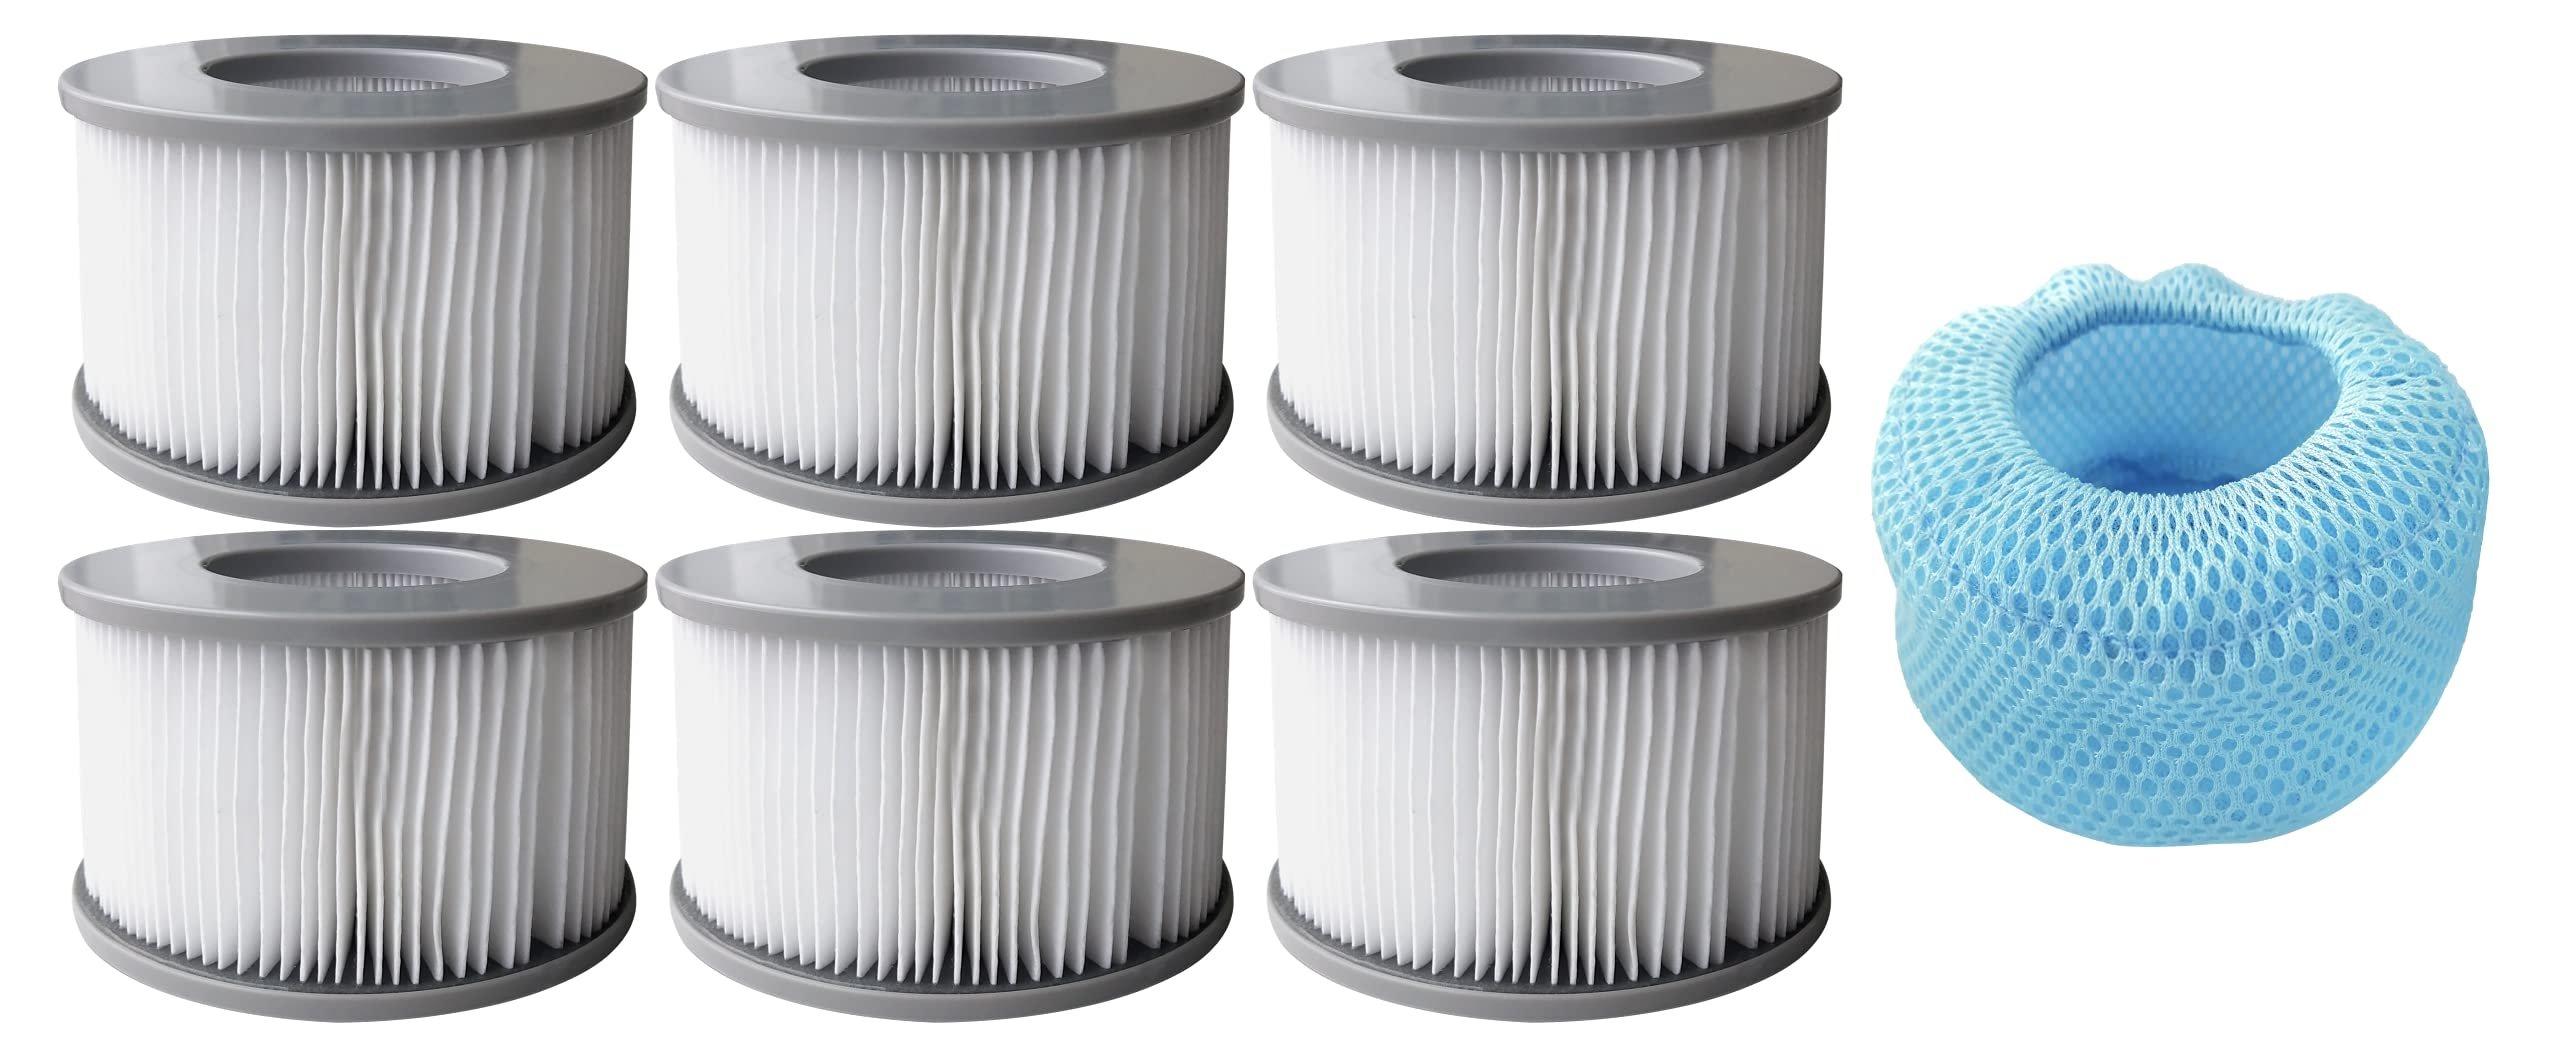 Mspa  Pack of 6 - 90 Pleats Filter Cartridges with Mesh Cover Pool Spa Hot Tub Accessories